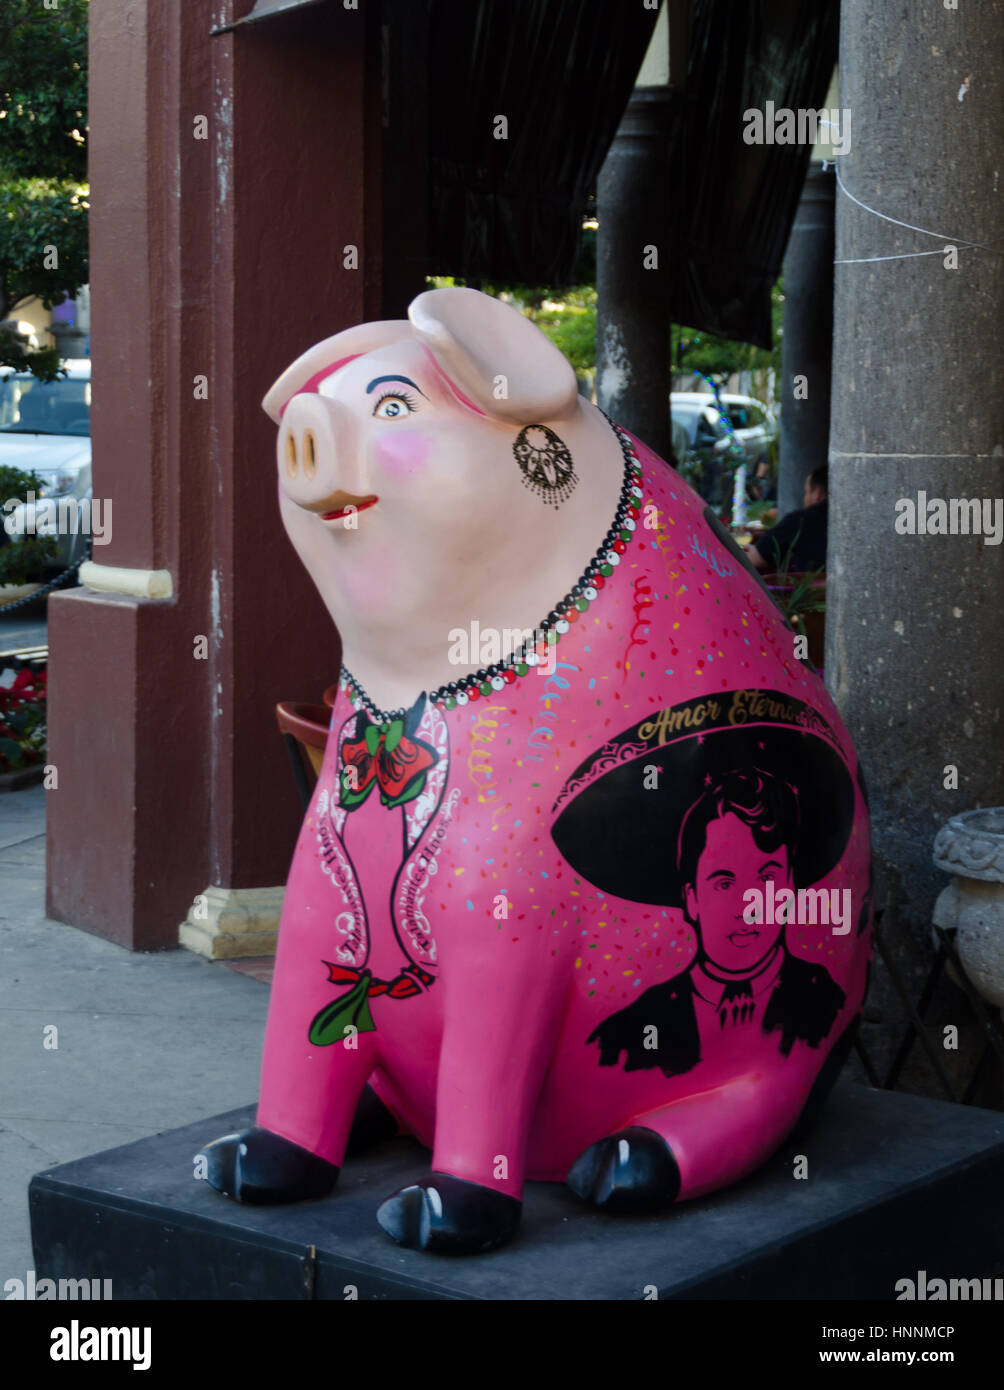 Numerous businesses in Tlaquepaque are promoting local arts by sponsoring a pig statue. Stock Photo